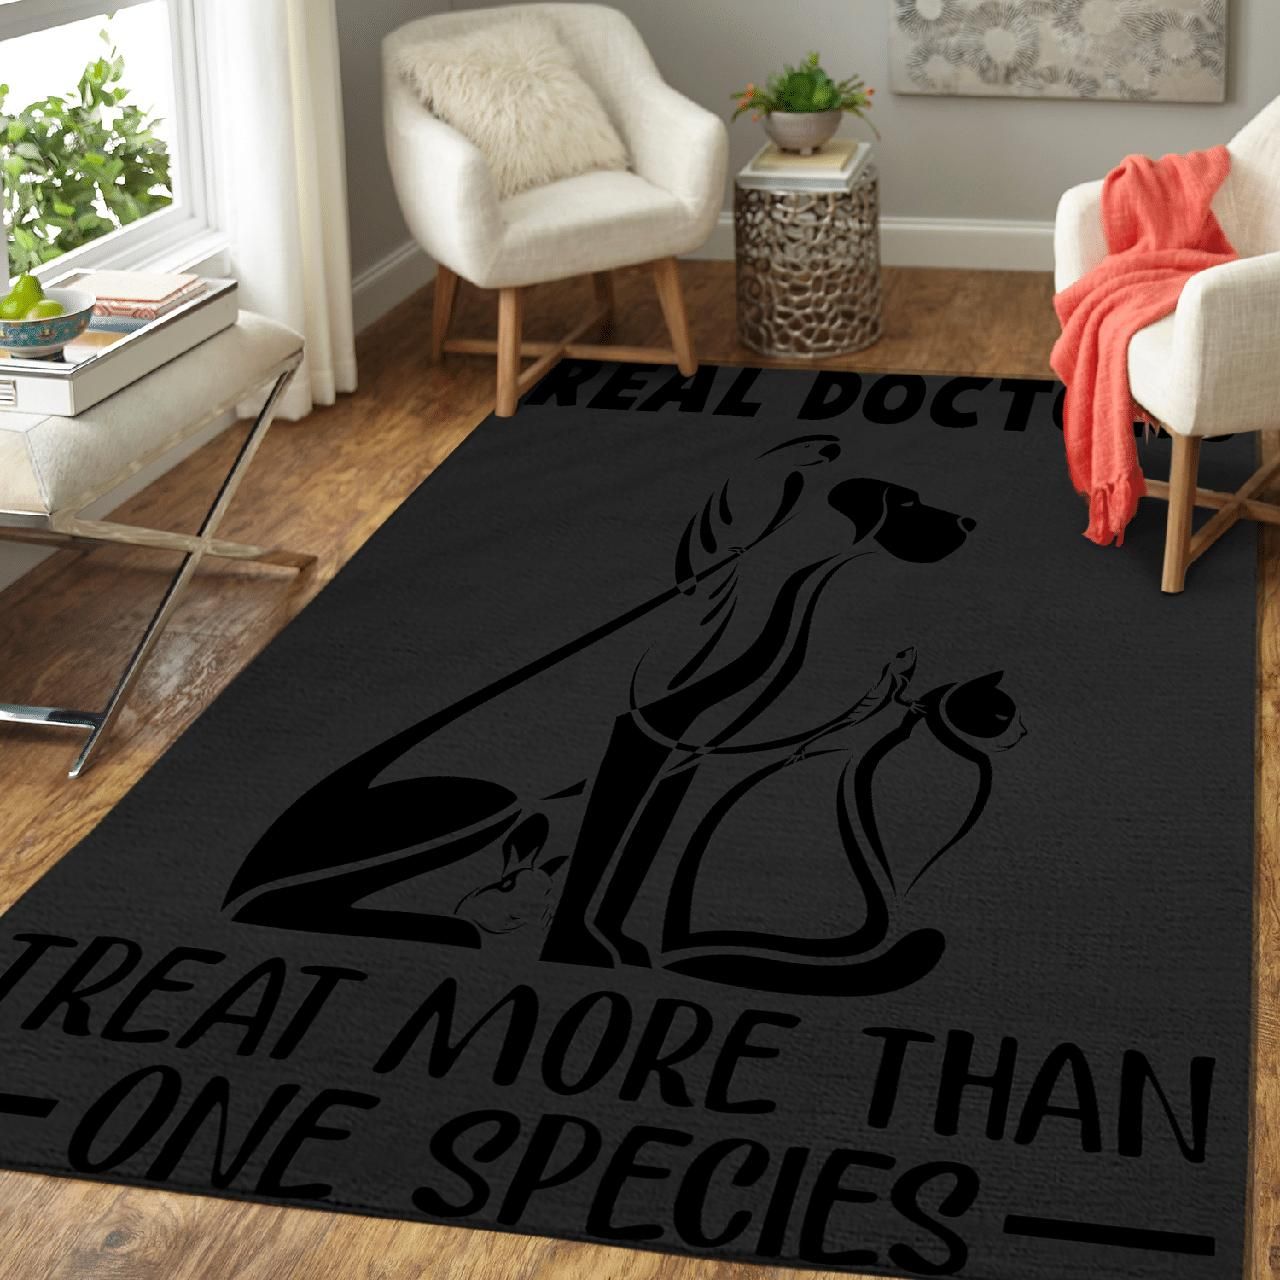 Real Doctors Treat More Than One Area Rug